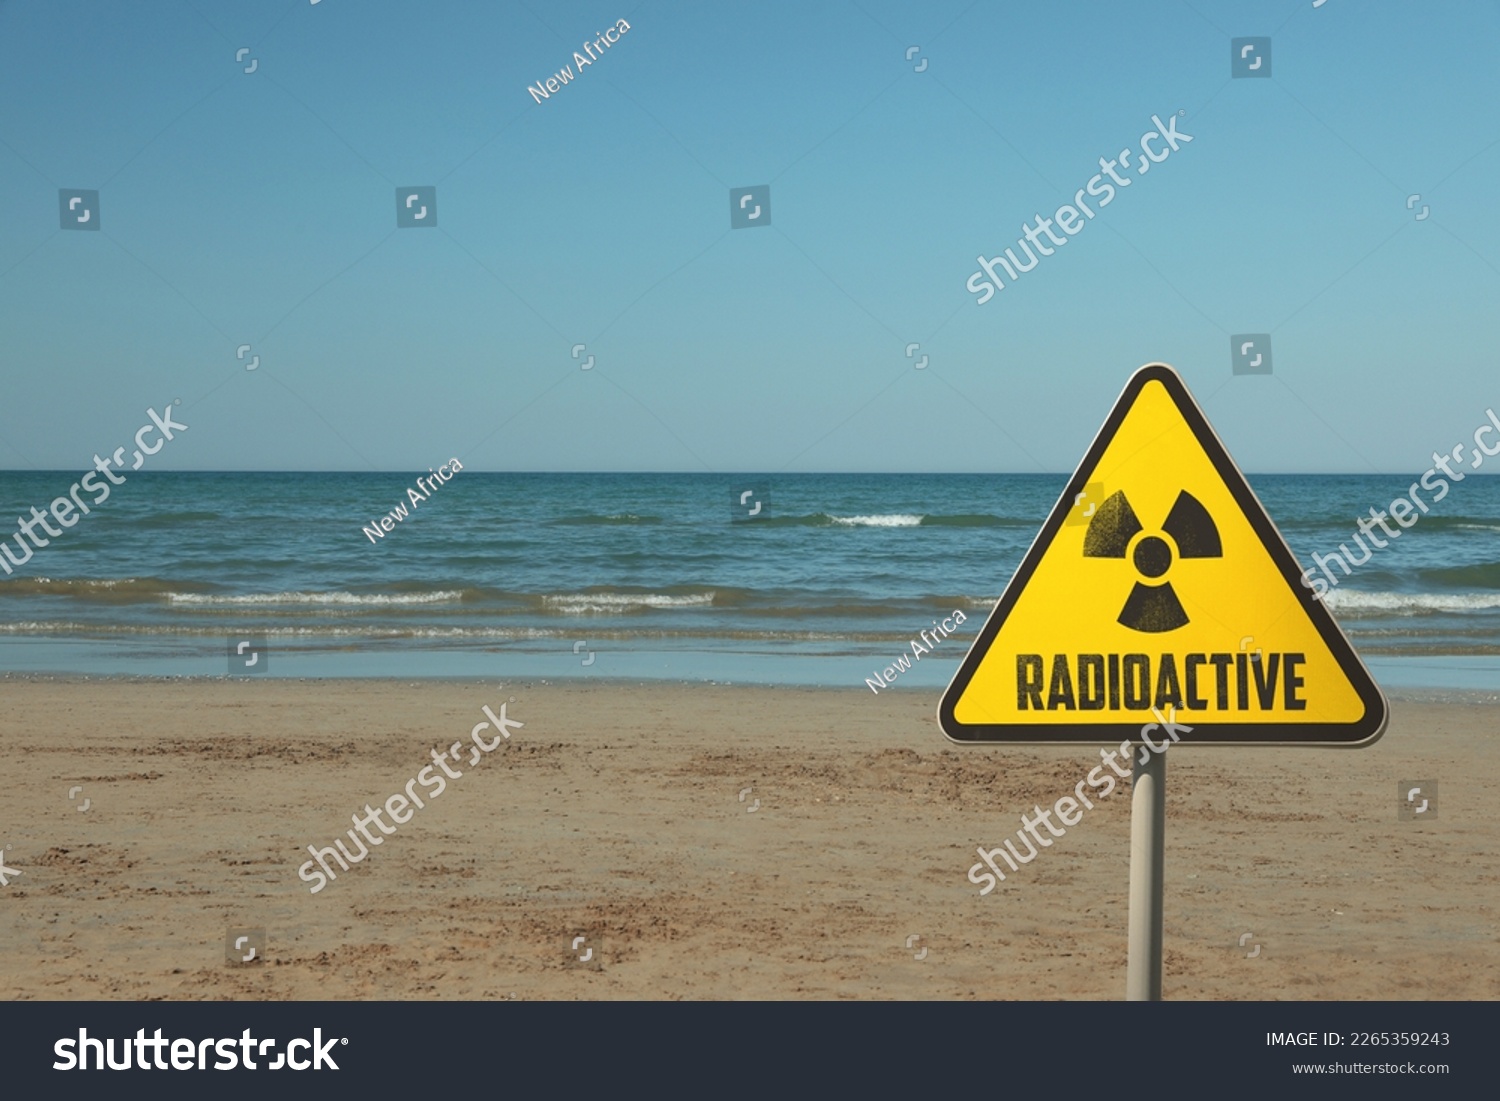 Radioactive pollution. Yellow warning sign with hazard symbol near contaminated area on beach. Space for text #2265359243